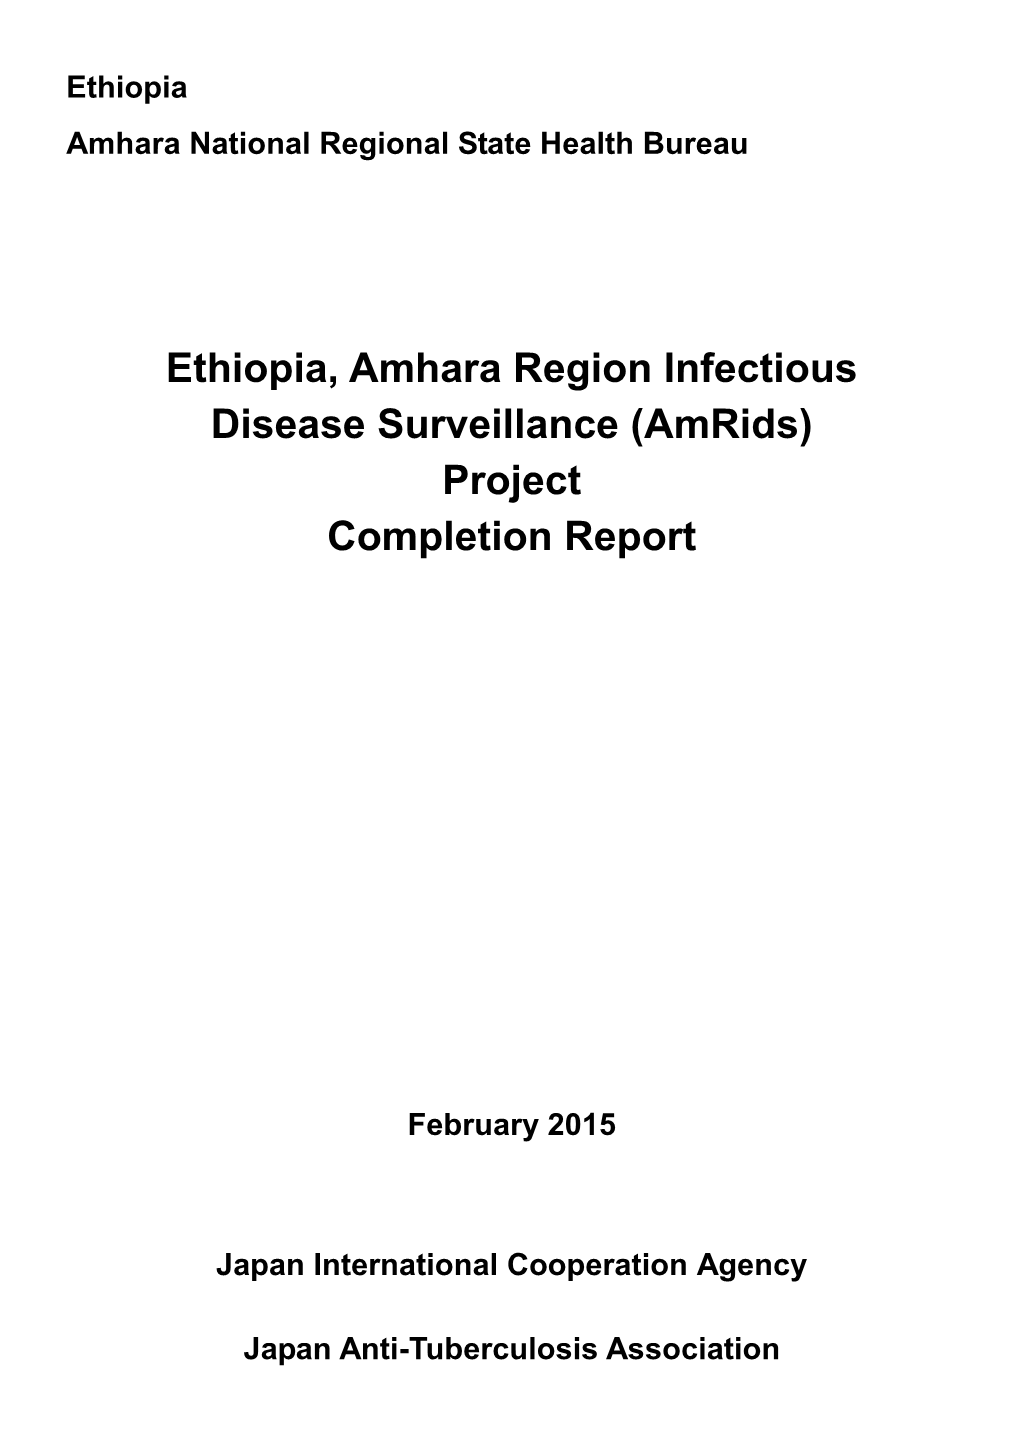 Ethiopia, Amhara Region Infectious Disease Surveillance (Amrids) Project Completion Report